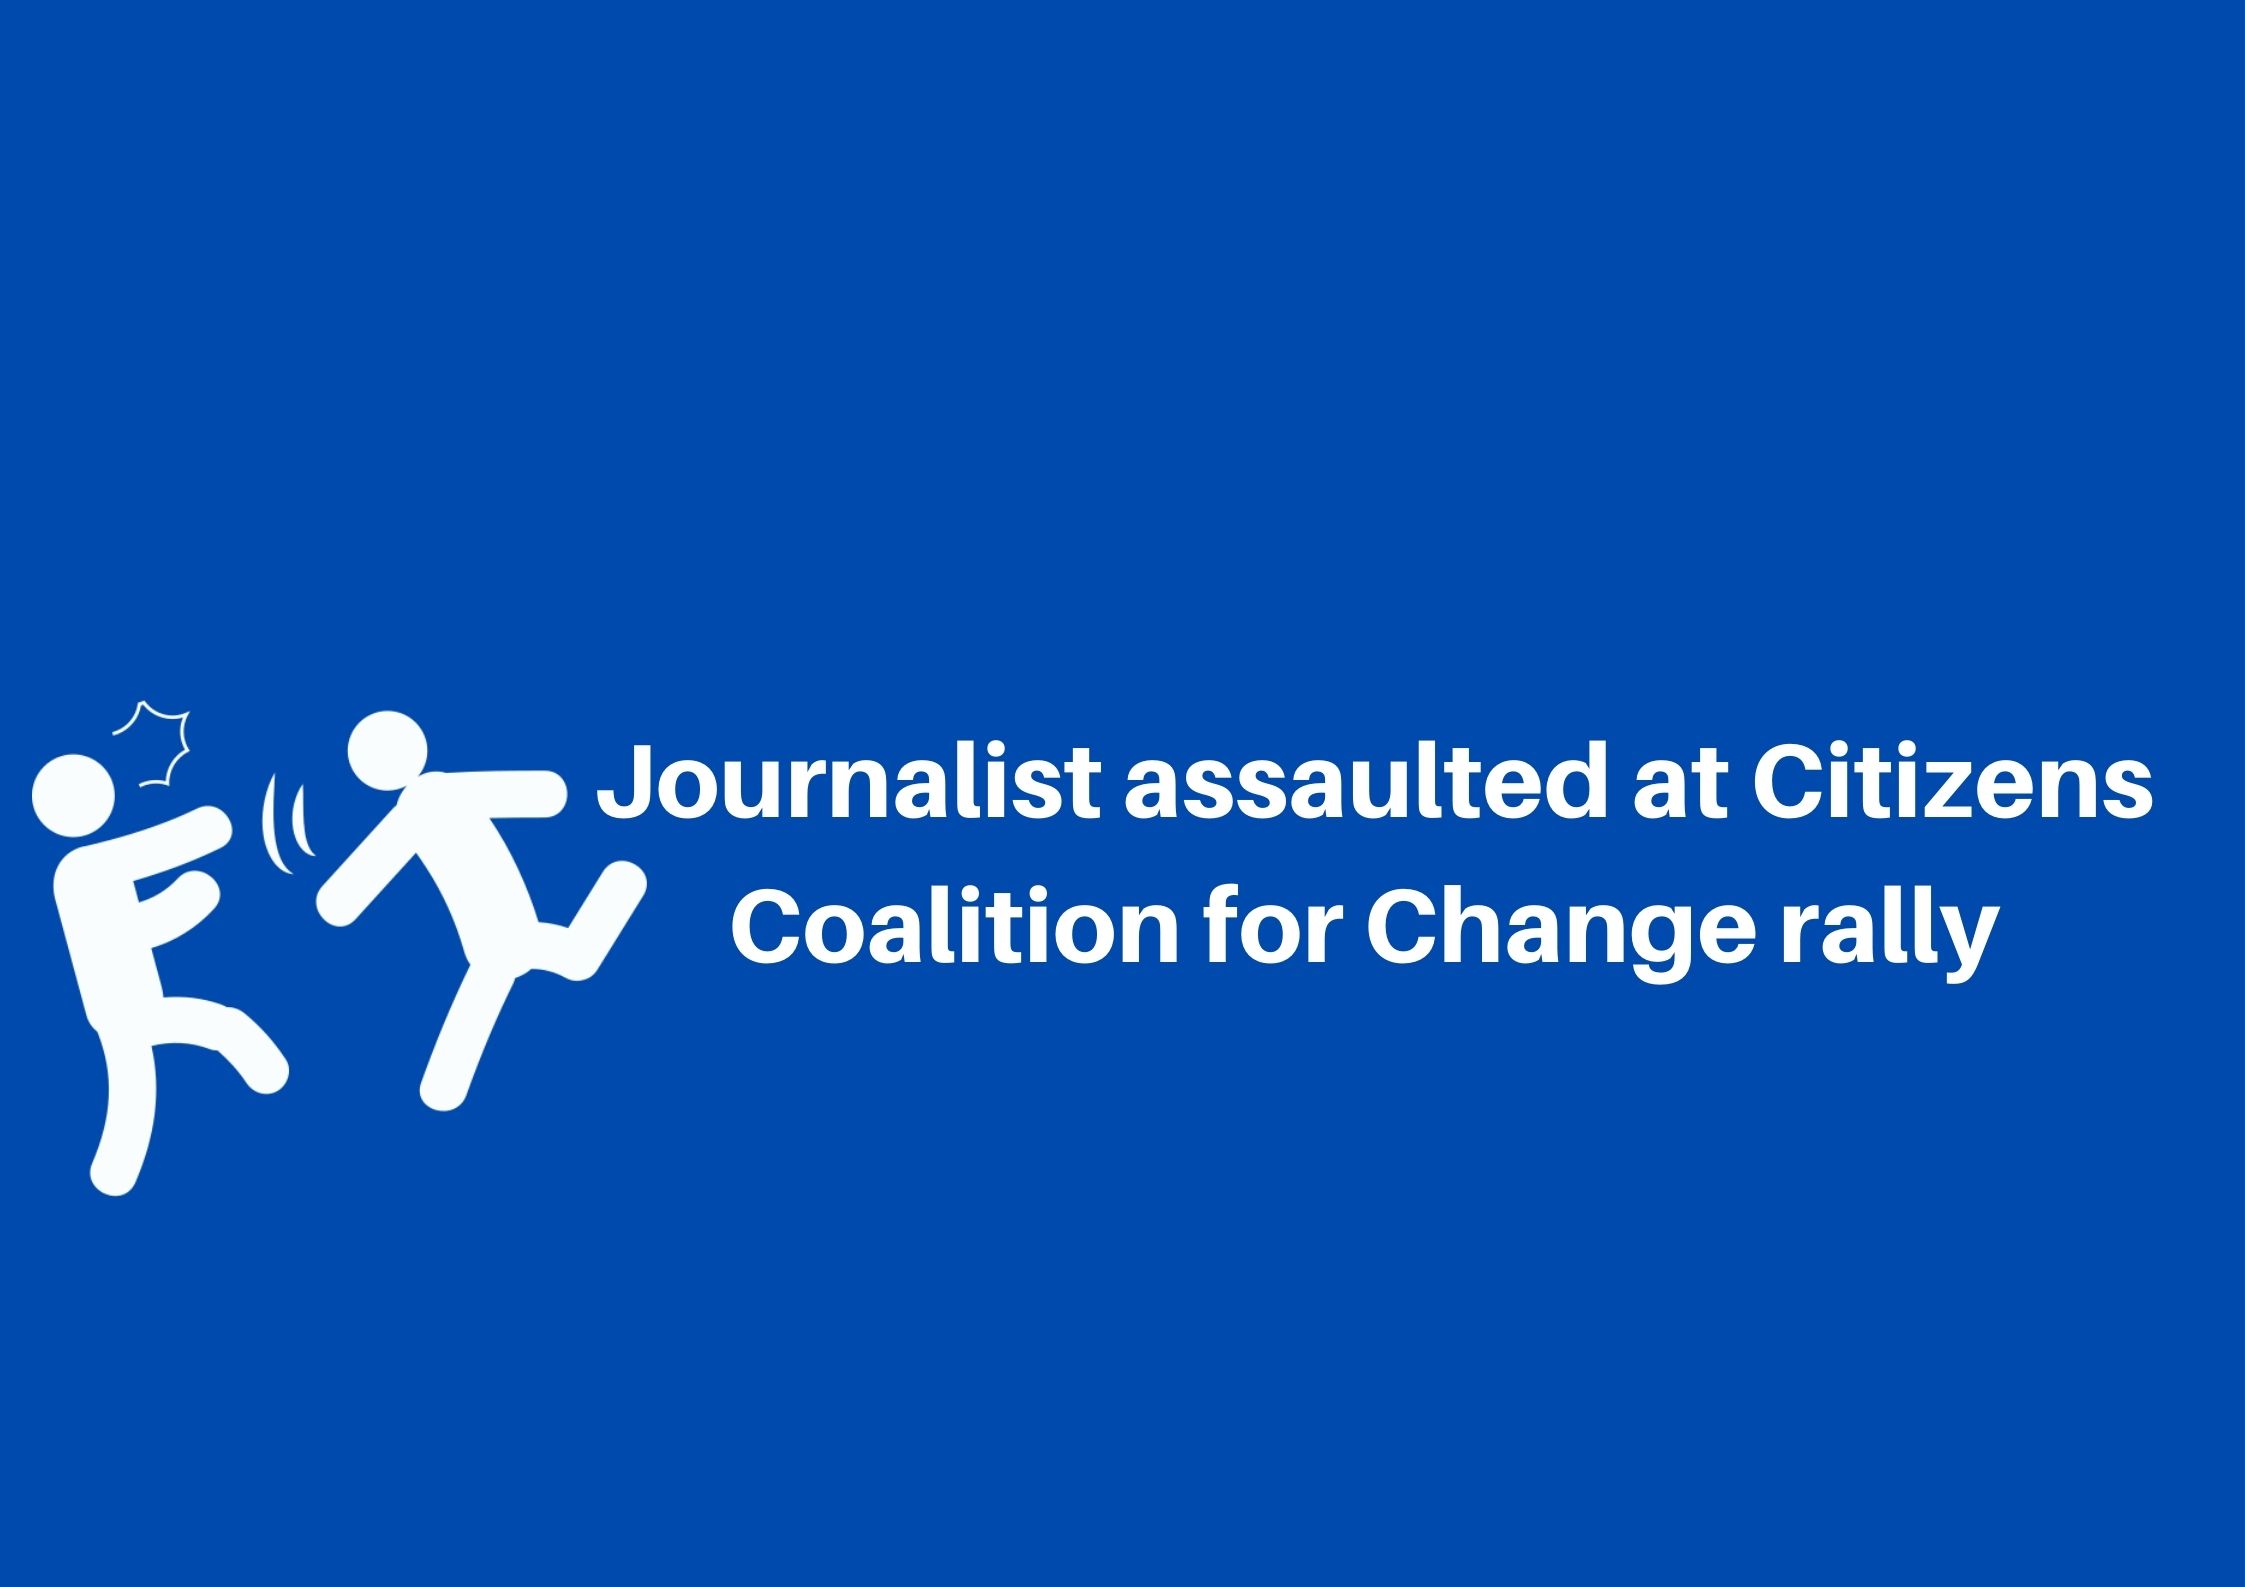 Journalist assaulted at Citizens Coalition for Change rally